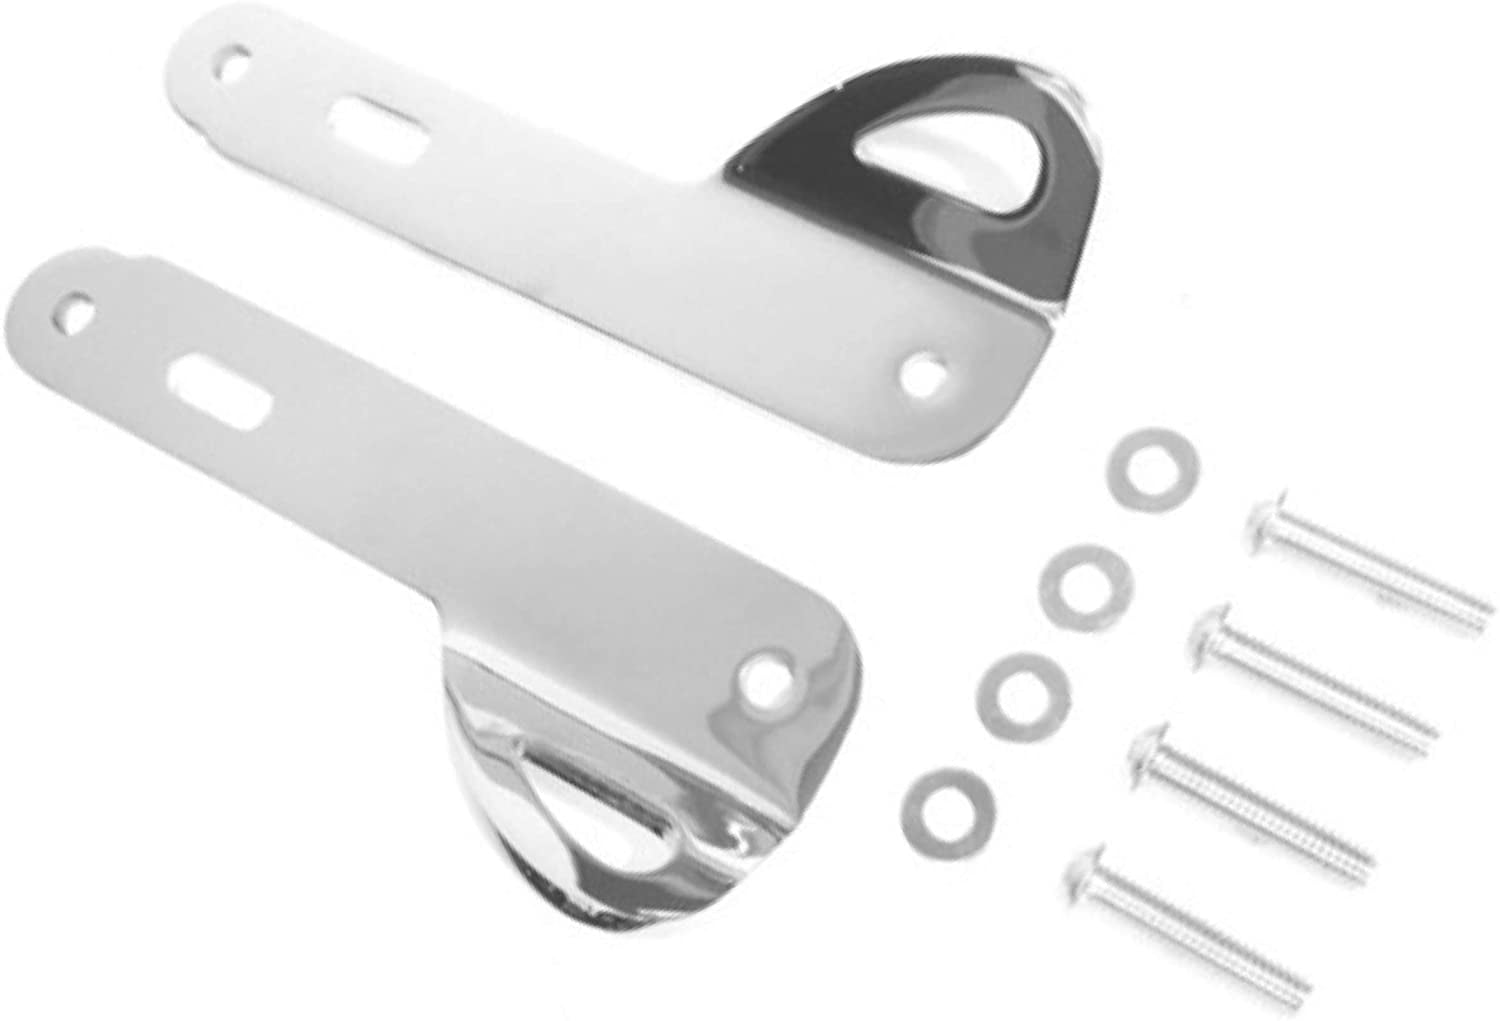 Chrome Tie Downs Mount Bracket Kit Compatible with Harley-Davidson 2014-2020 Electra Glide Special Ultra Classic Limited Street Glide CVO Touring Models